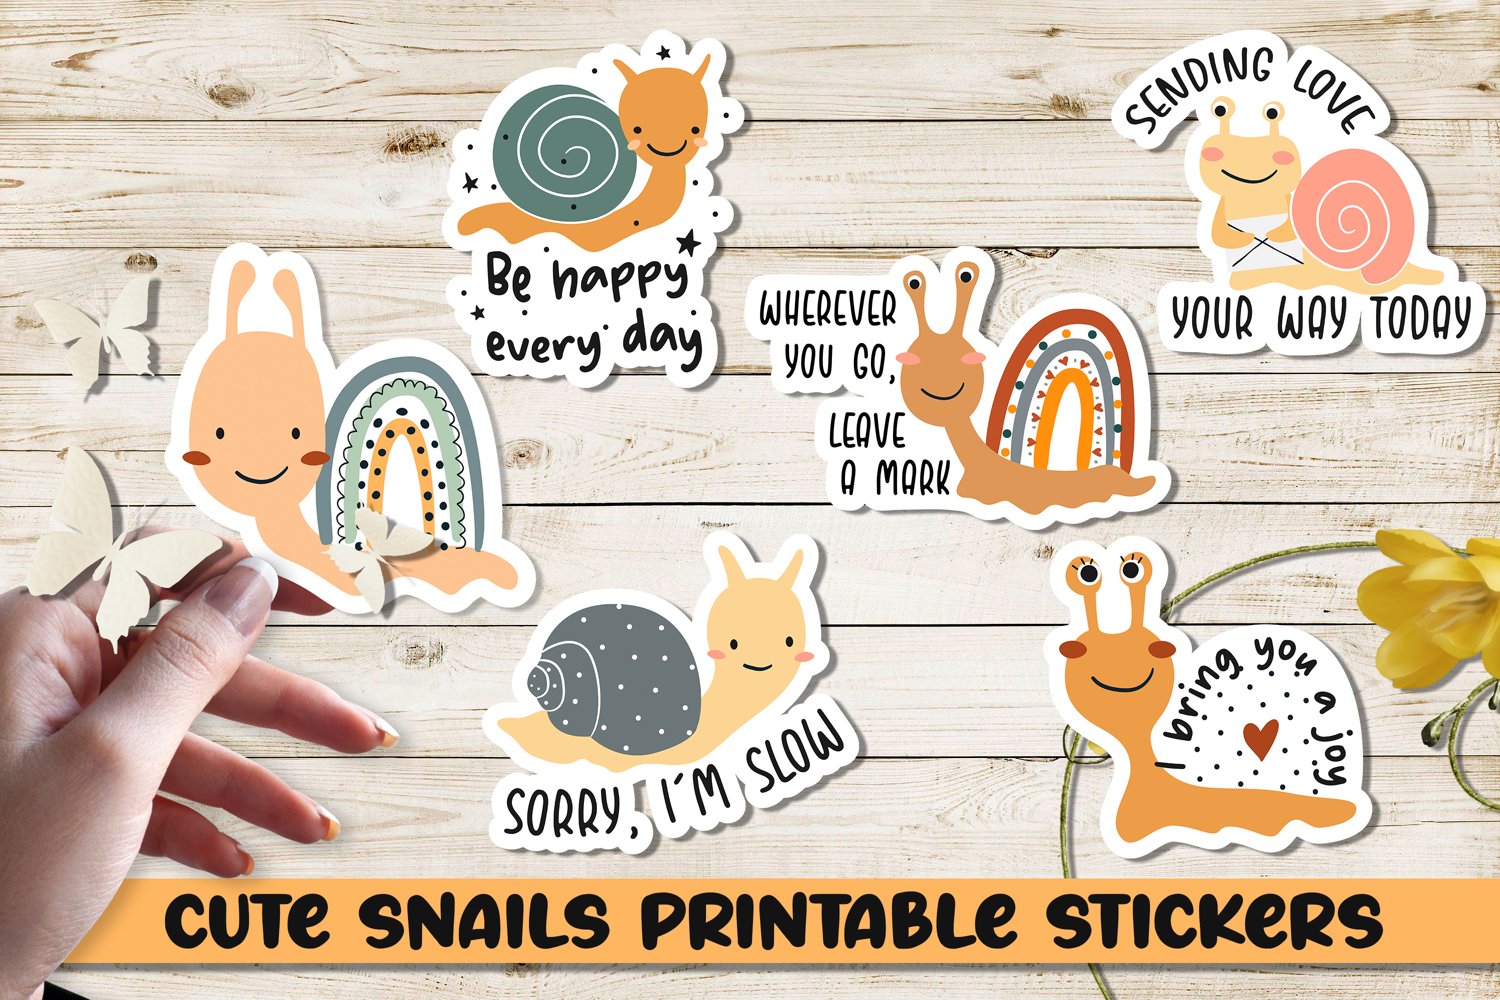 Cute snails printable stickers.